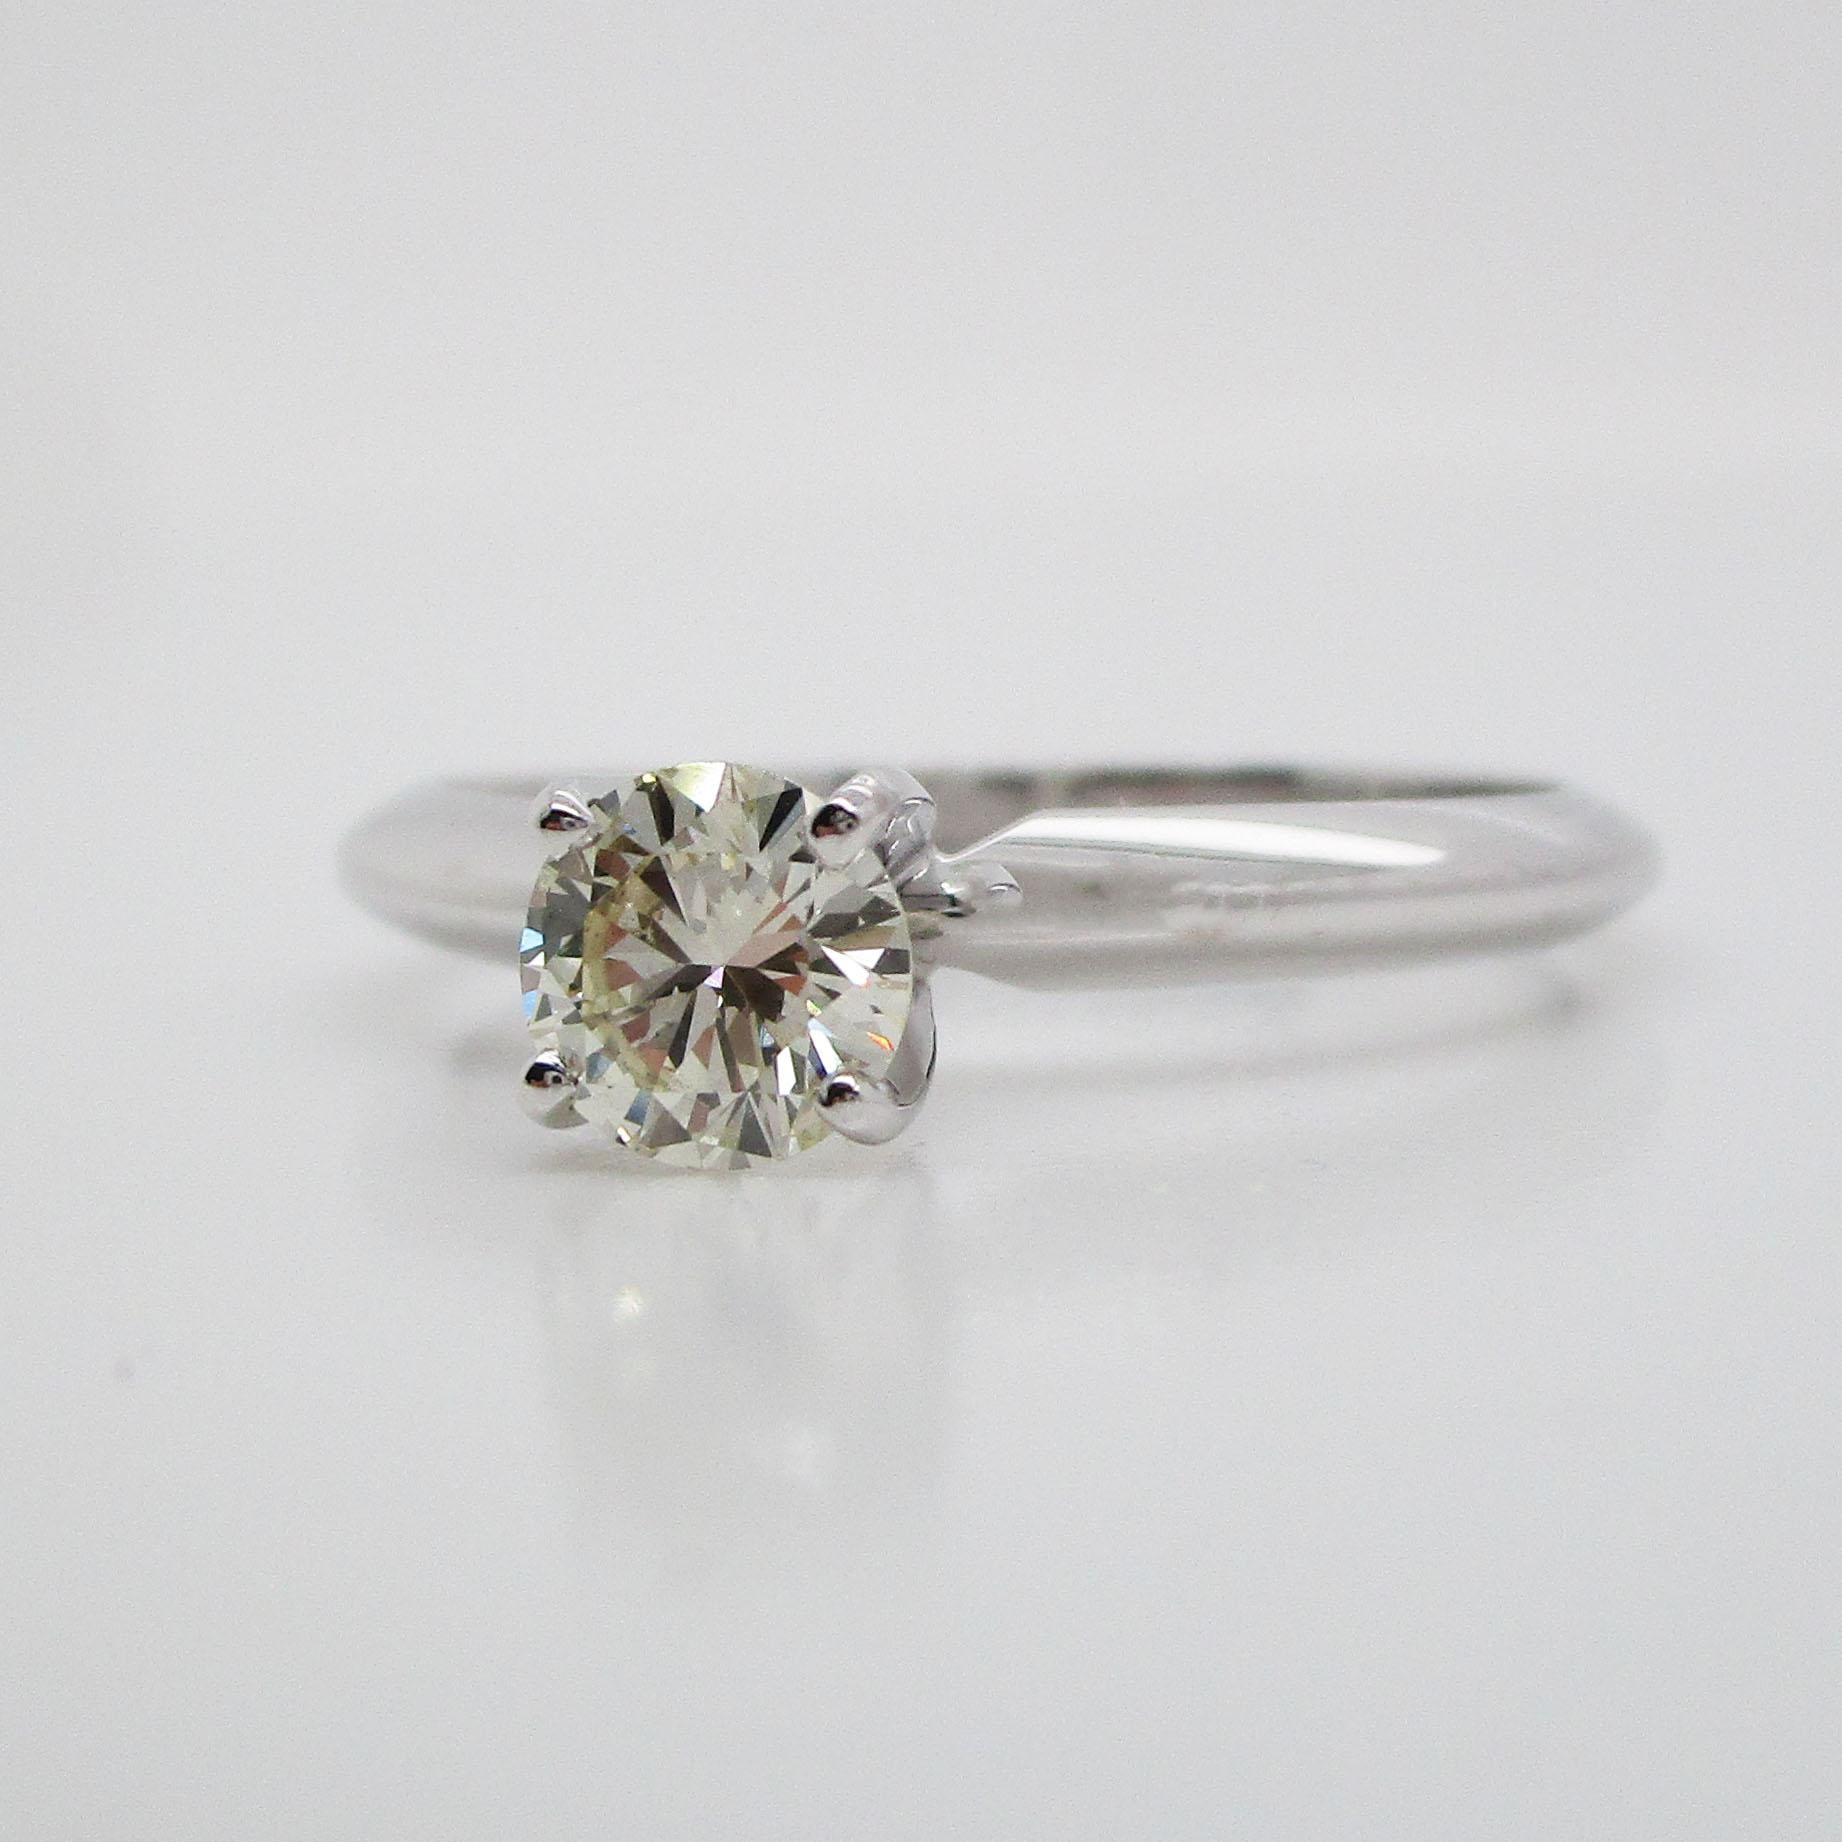 This is a beautiful classic solitaire engagement ring in 18k white gold. This is the ideal ring for the woman who craves the classic, traditional look! 
This ring is a size 6 but can be resized upon request. 
The center diamond is 0.66 carats. It is